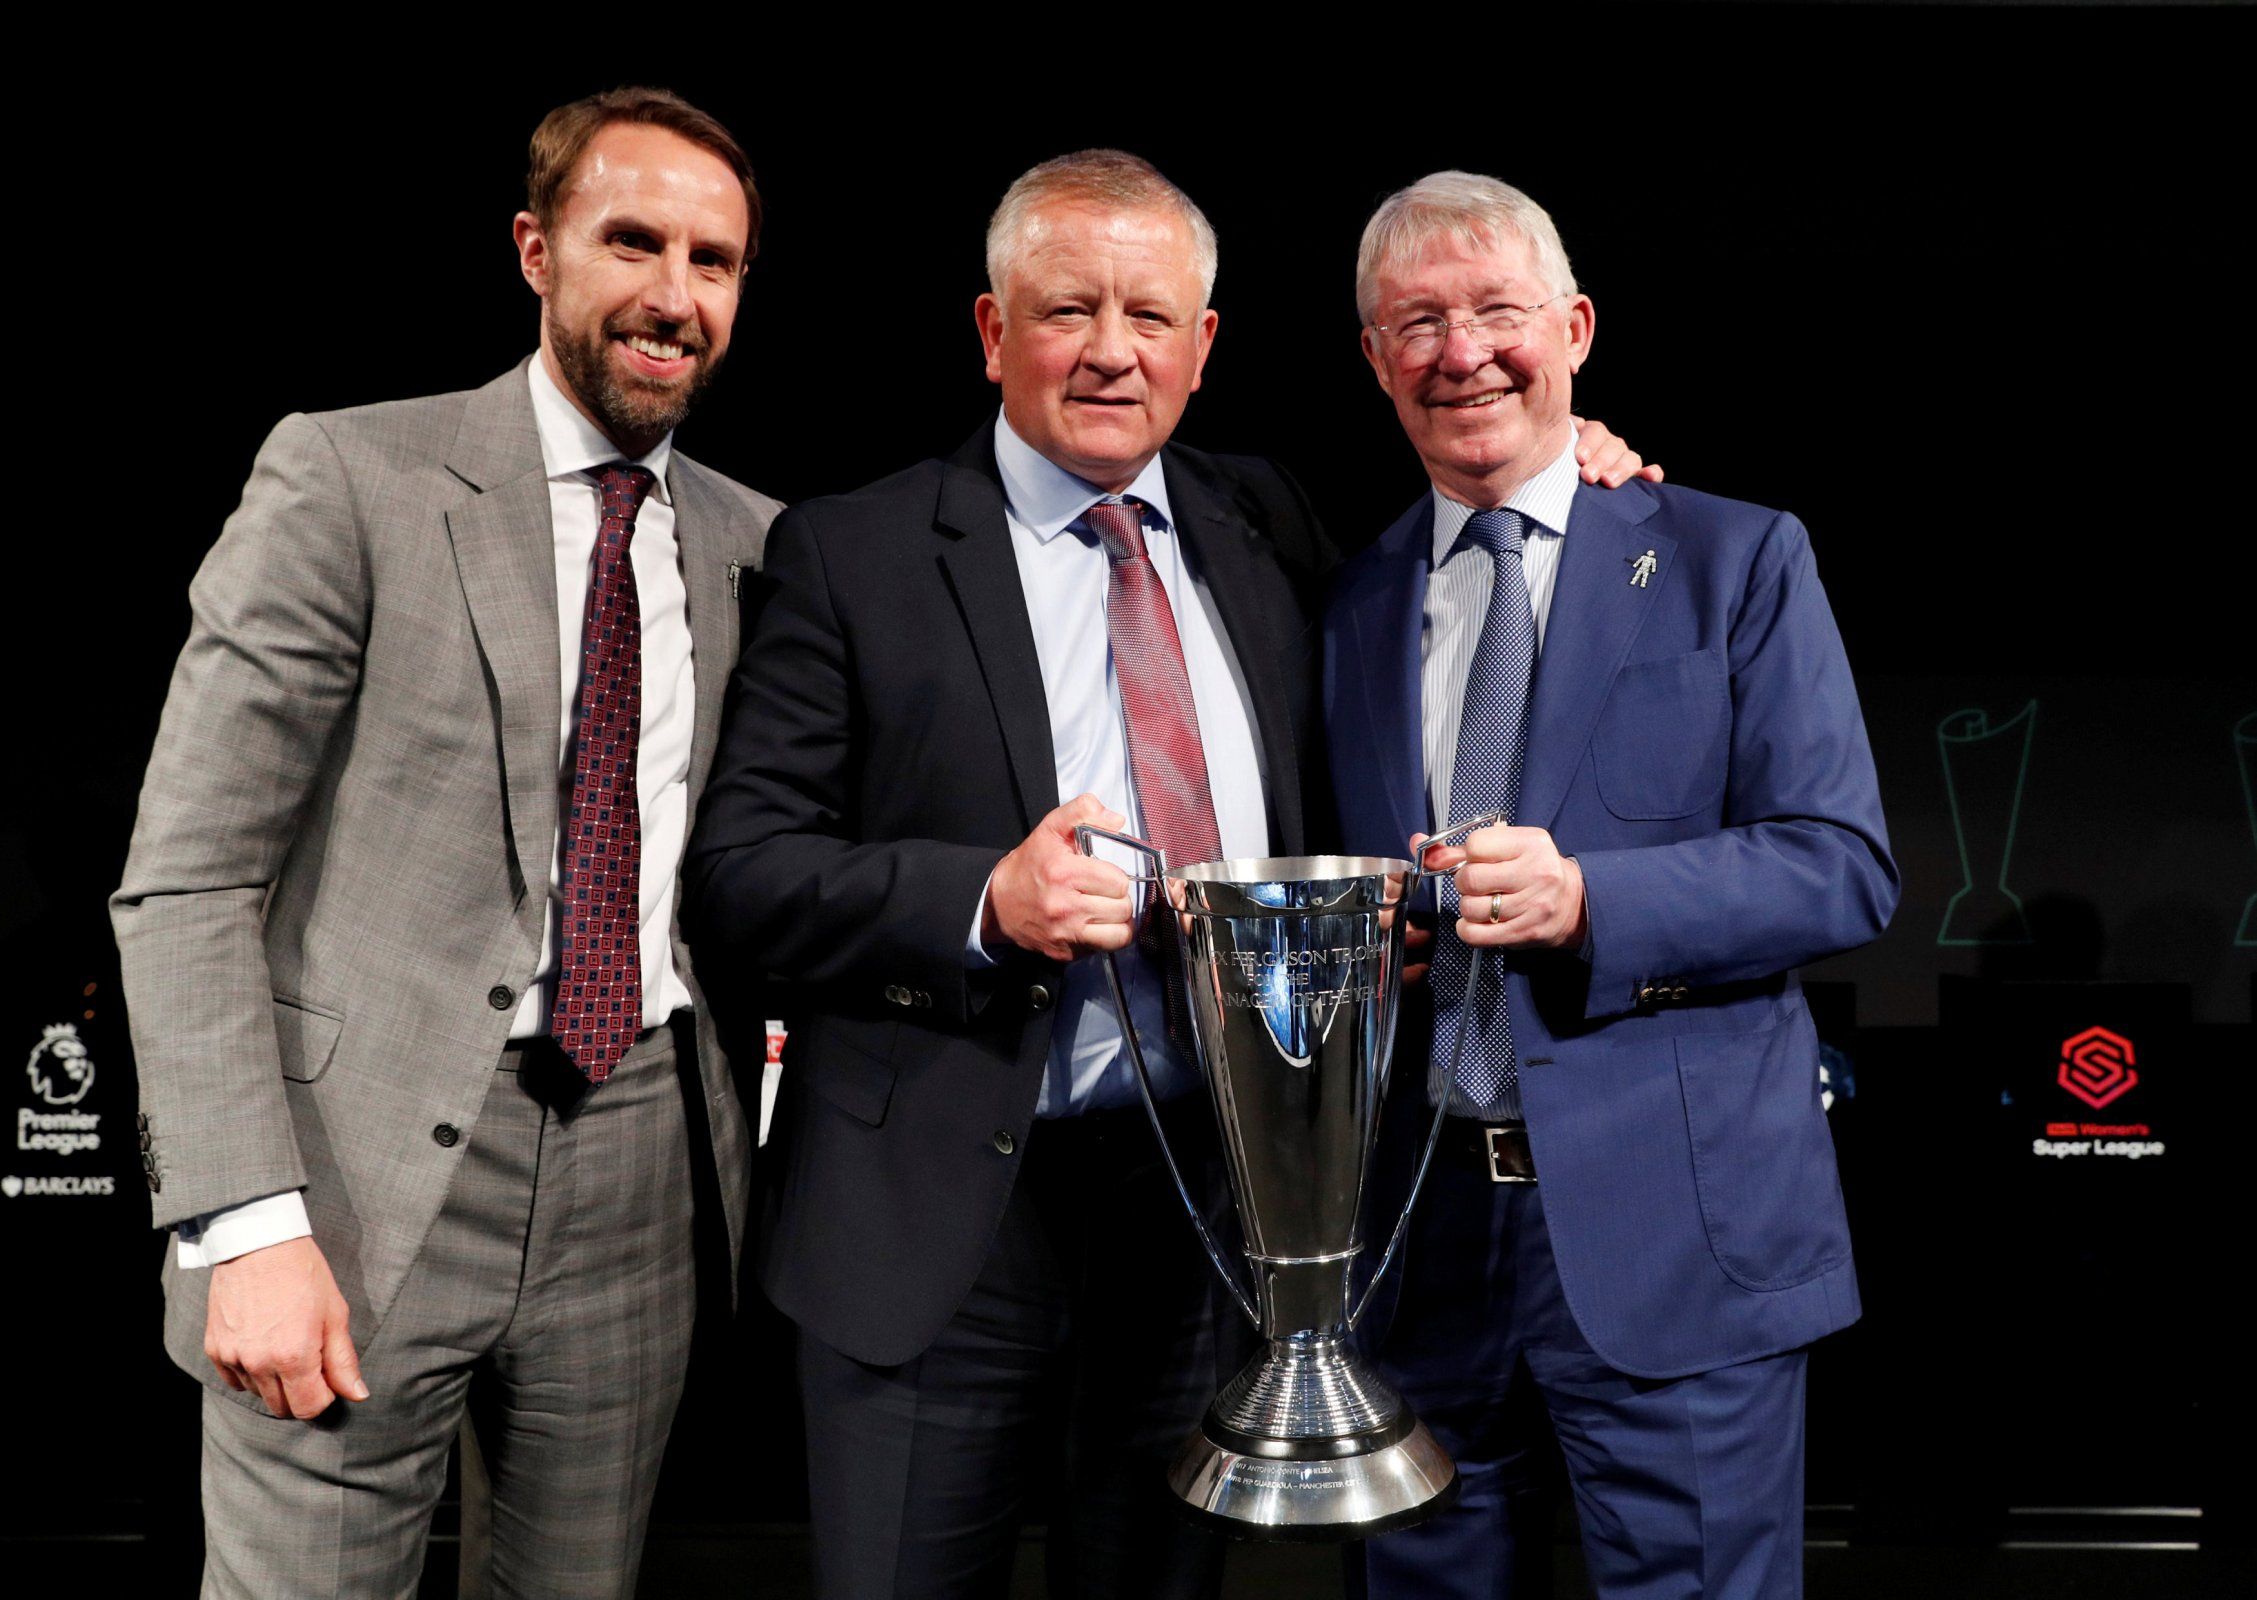 chris wilder poses with the sir alex ferguson trophy for lma manager of the year 2018/19